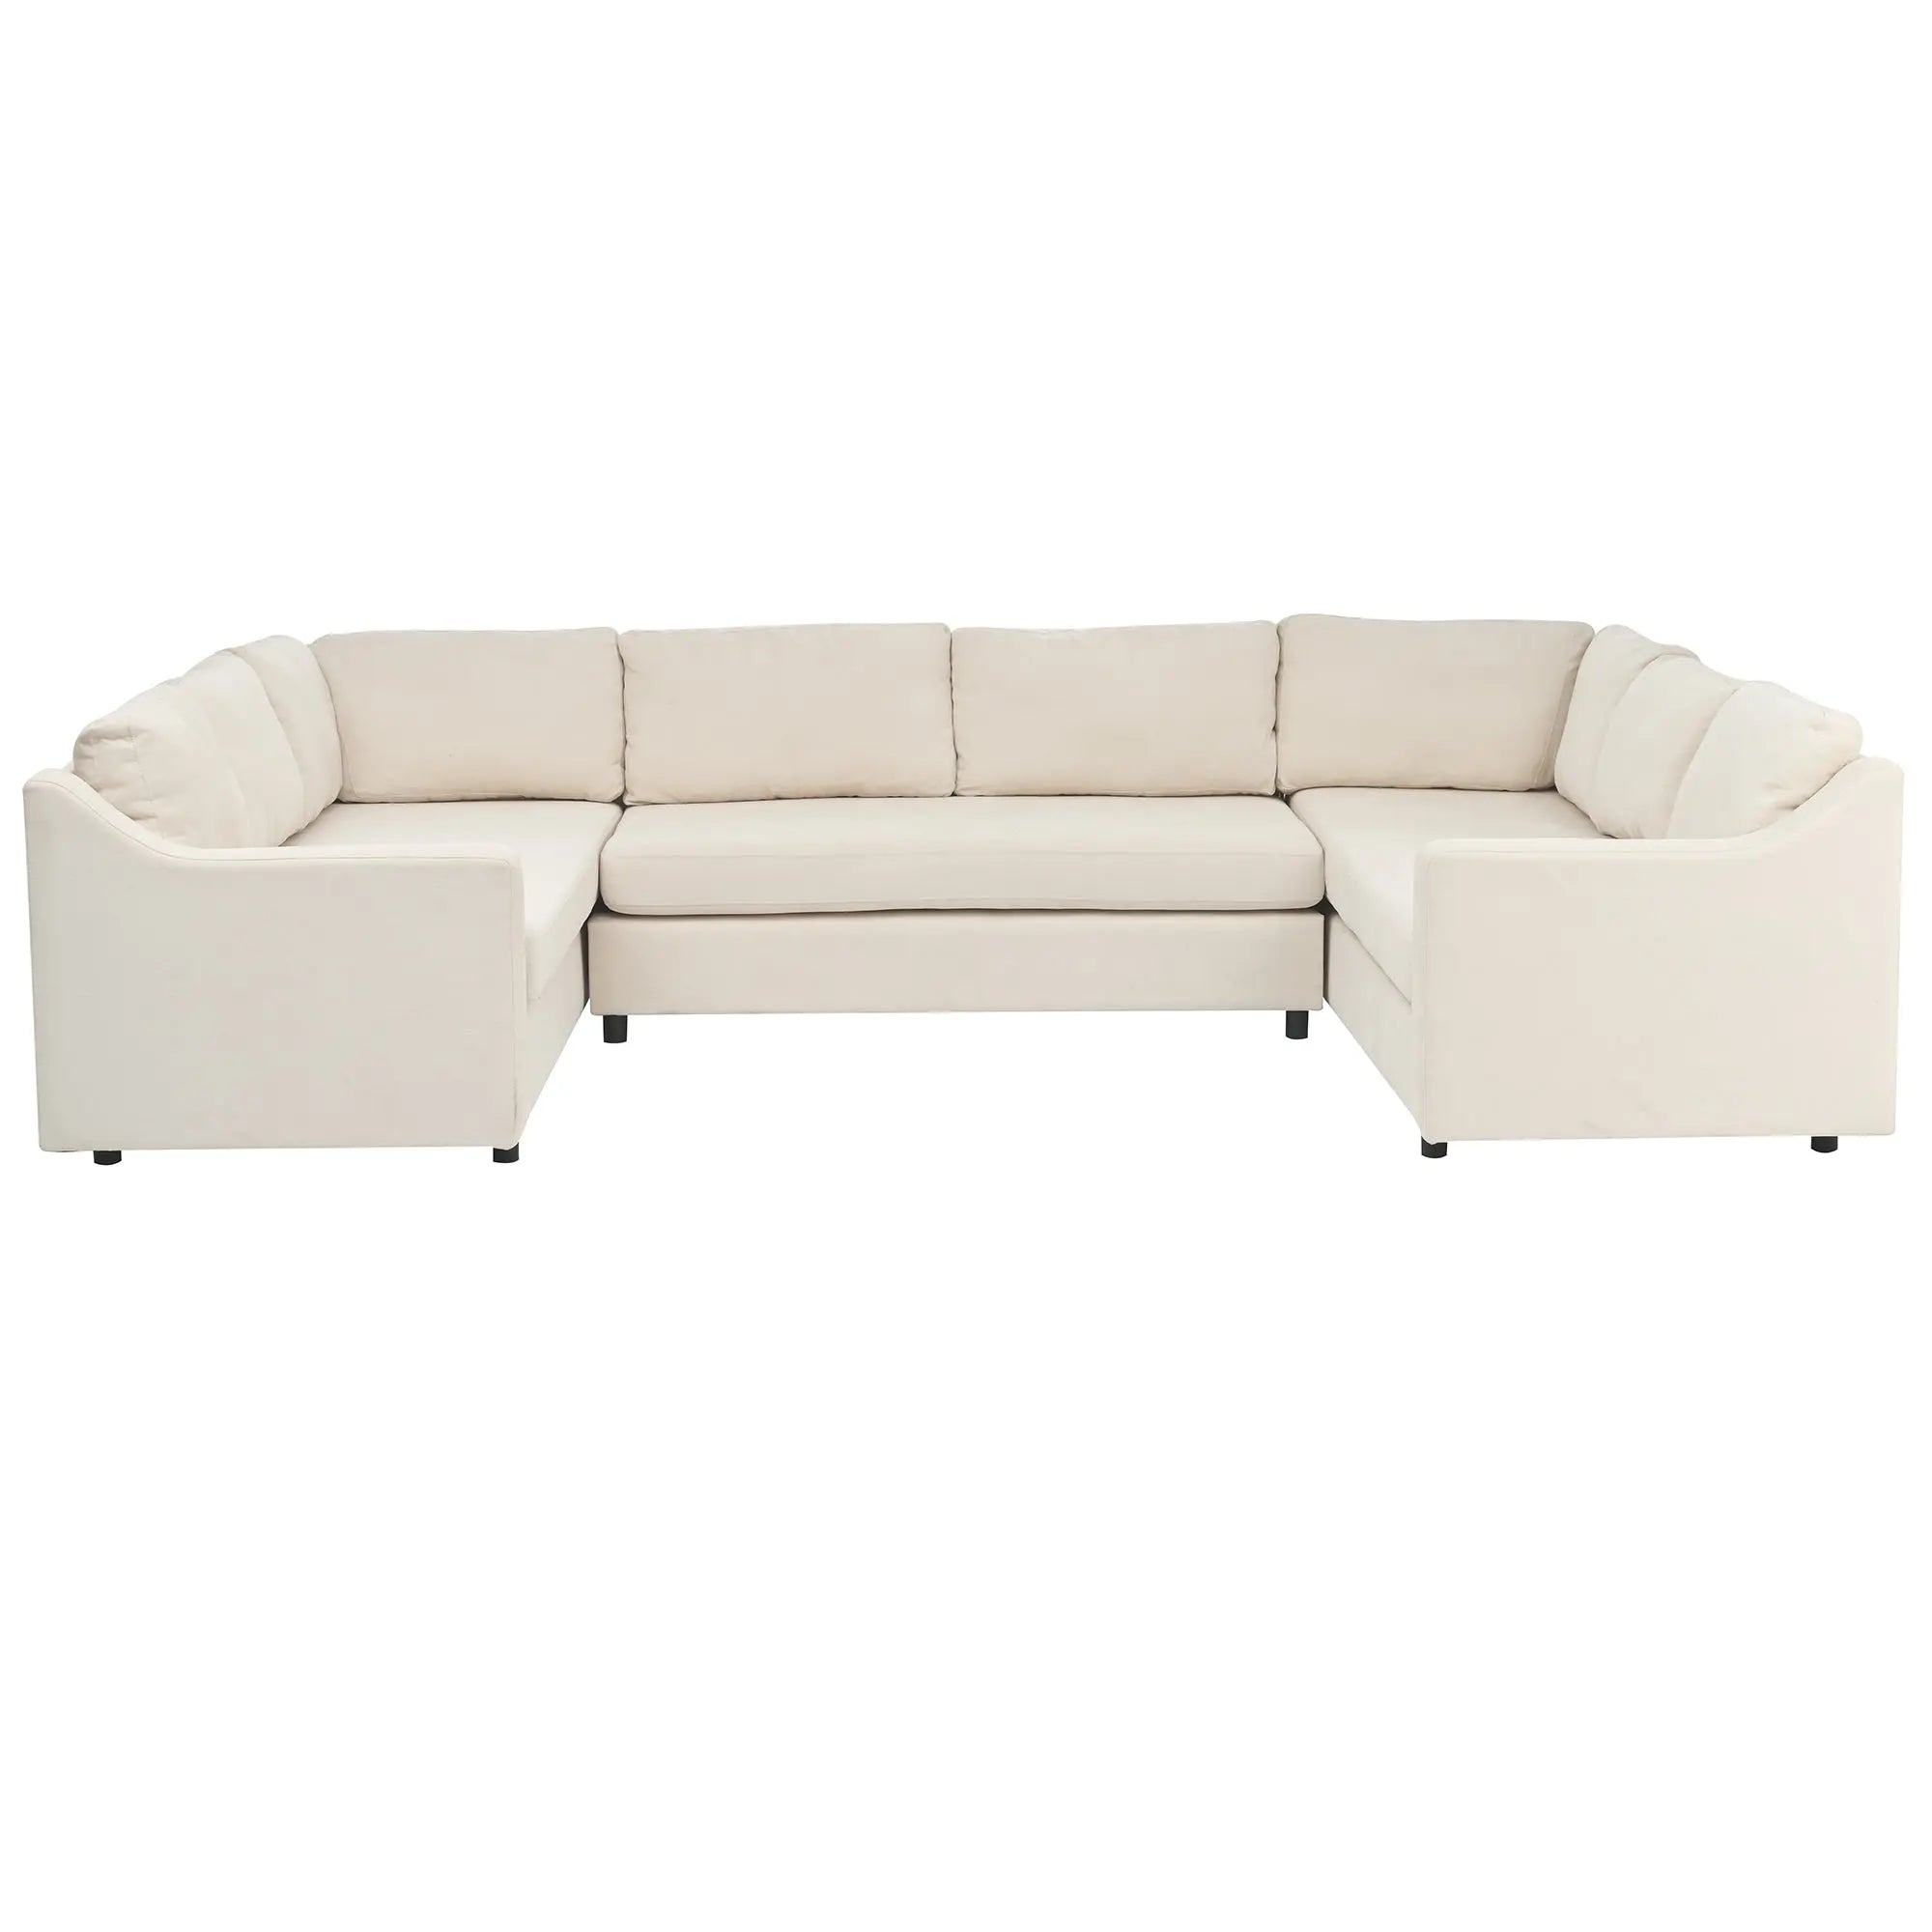 Bellemave 117" 3 Pieces Upholstered U-Shaped Large Sectional Sofa with Thick Seat and Back cushions Bellemave